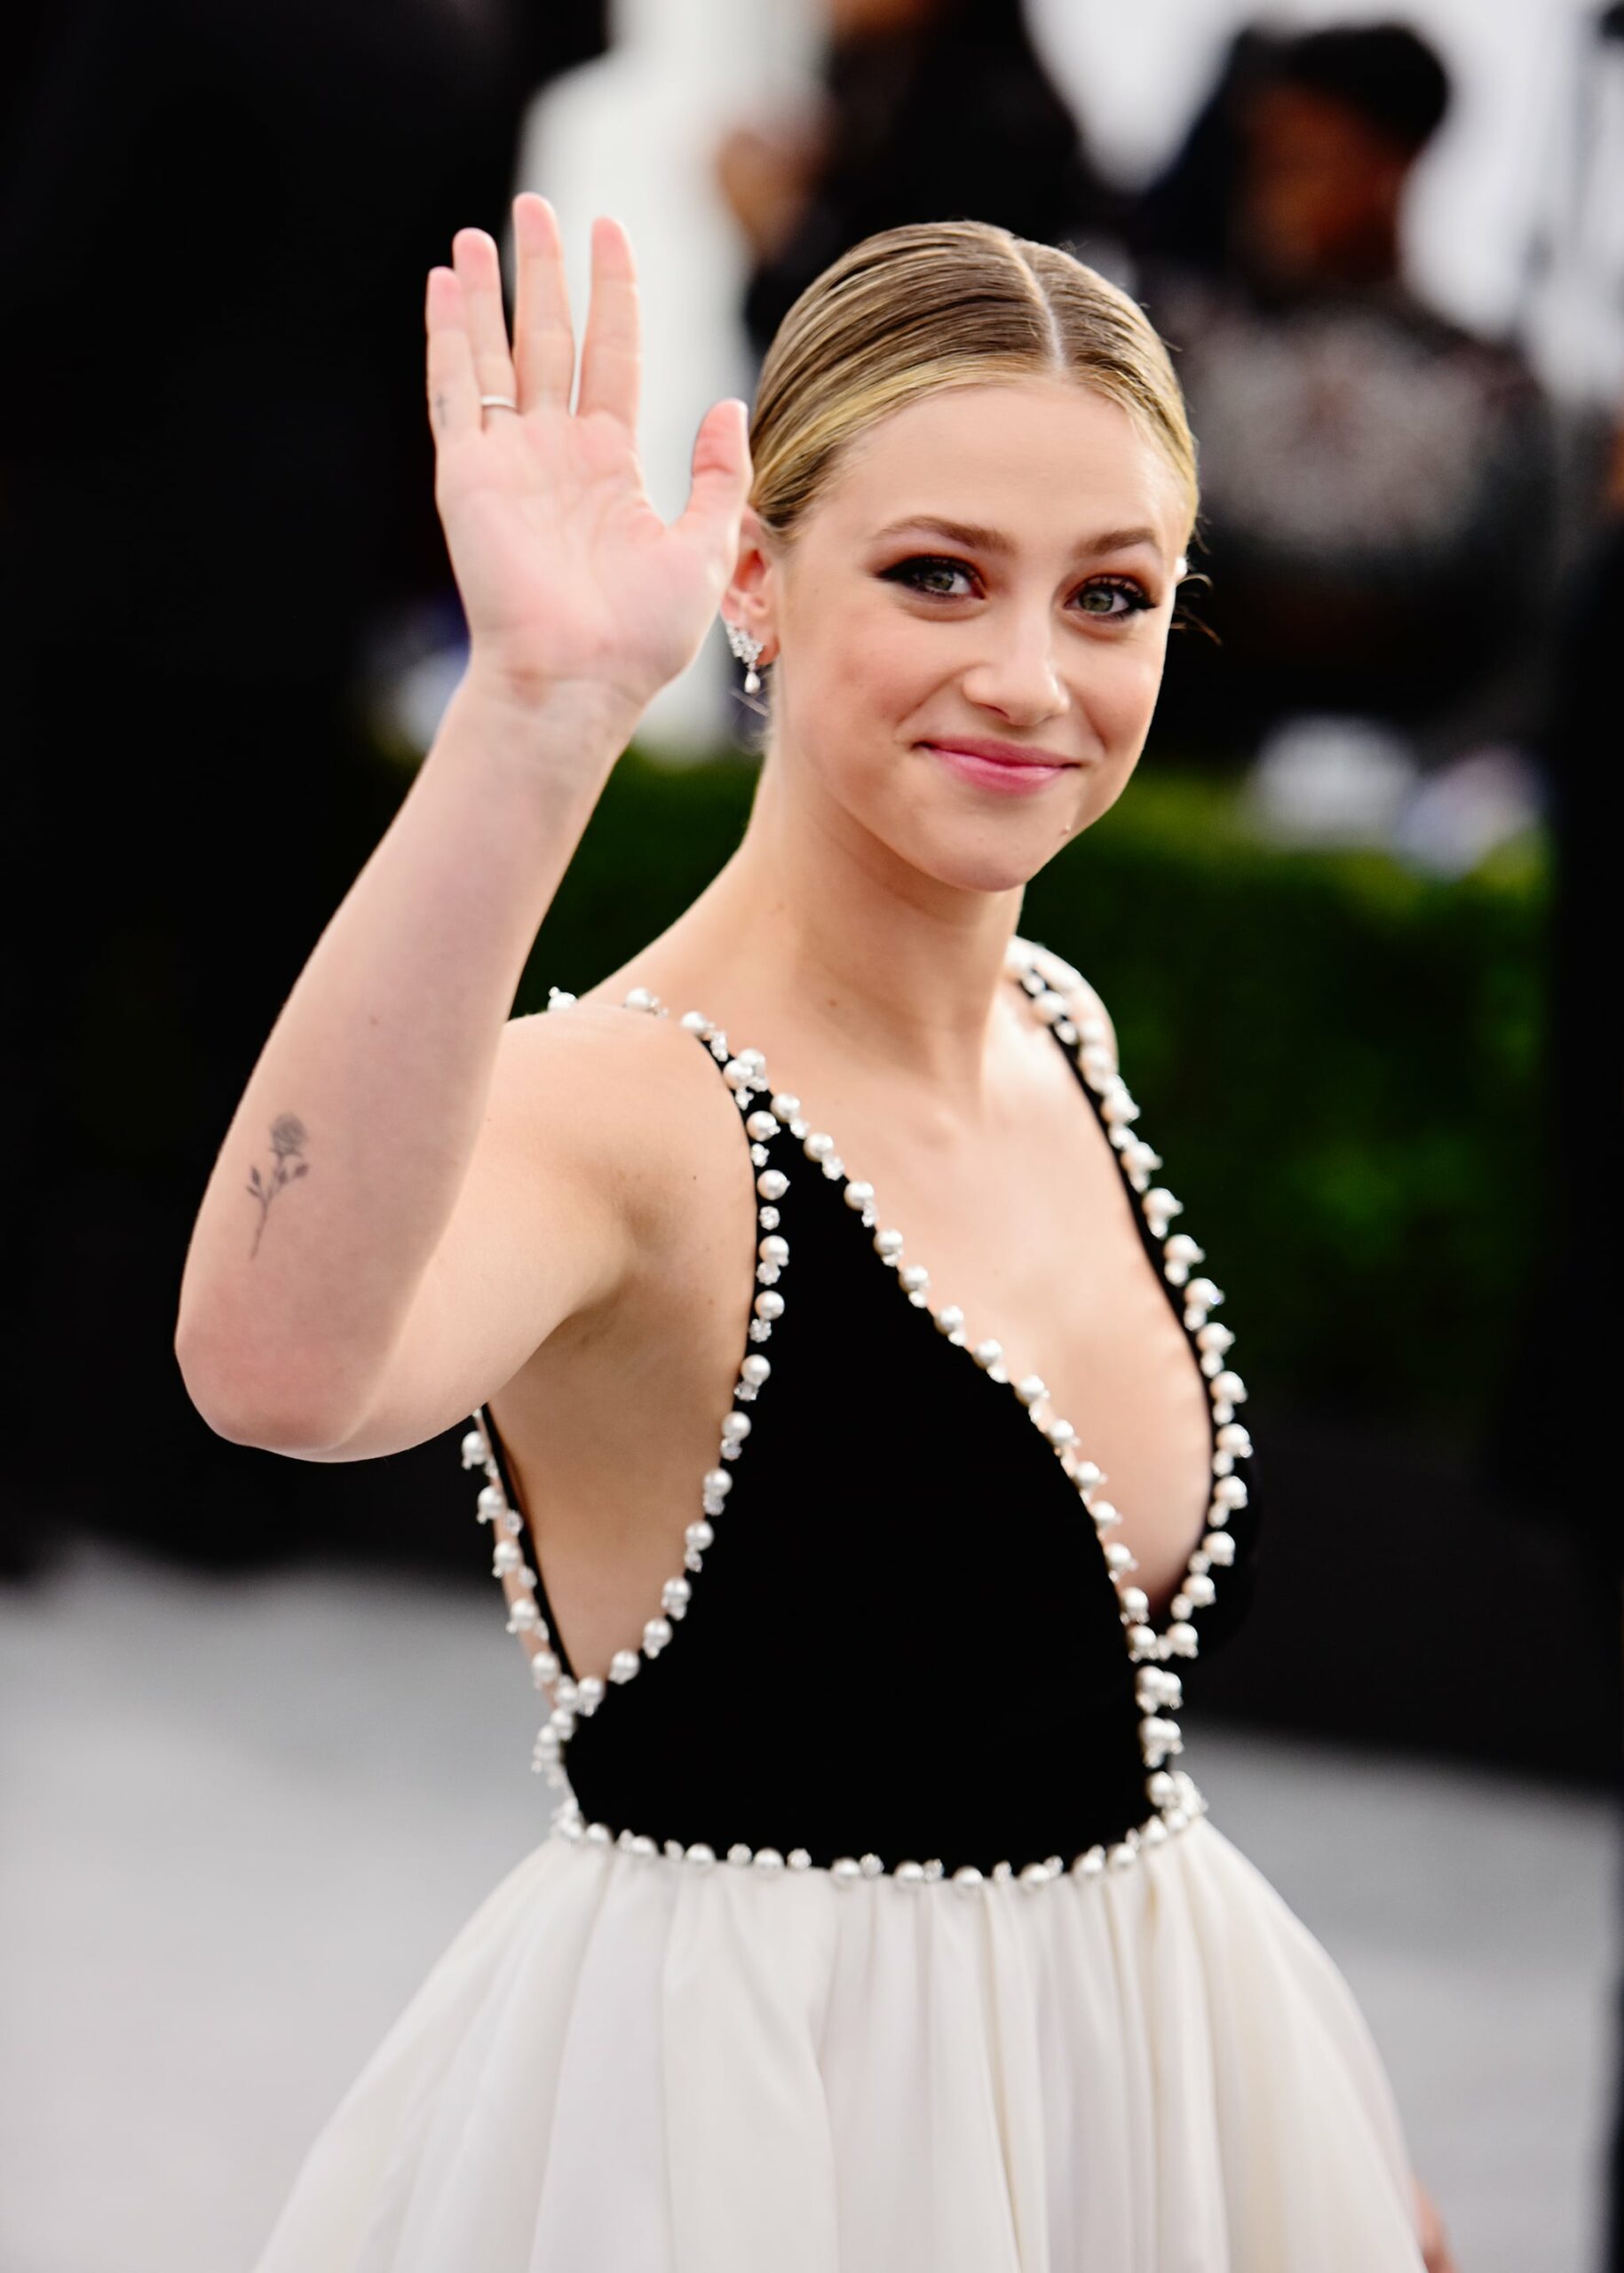 LOS ANGELES, CALIFORNIA - JANUARY 19:  Actor Lili Reinhart attends the 26th annual Screen Actors Guild Awards at The Shrine Auditorium on January 19, 2020 in Los Angeles, California. (Photo by Chelsea Guglielmino/Getty Images)